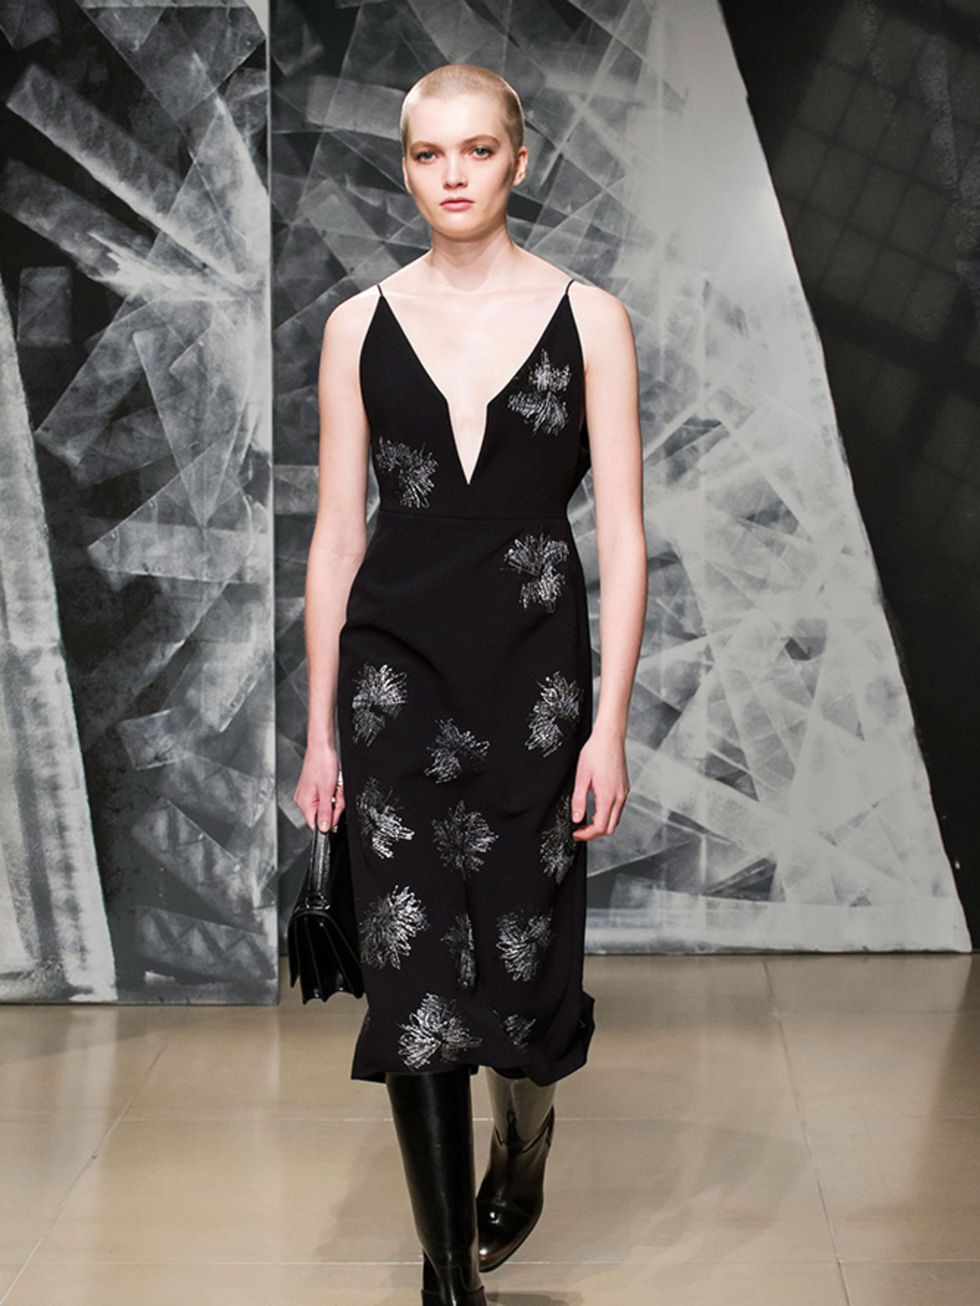 Ruth Bell in the Jill Sander show during Milan Fashion Week, February 2016.